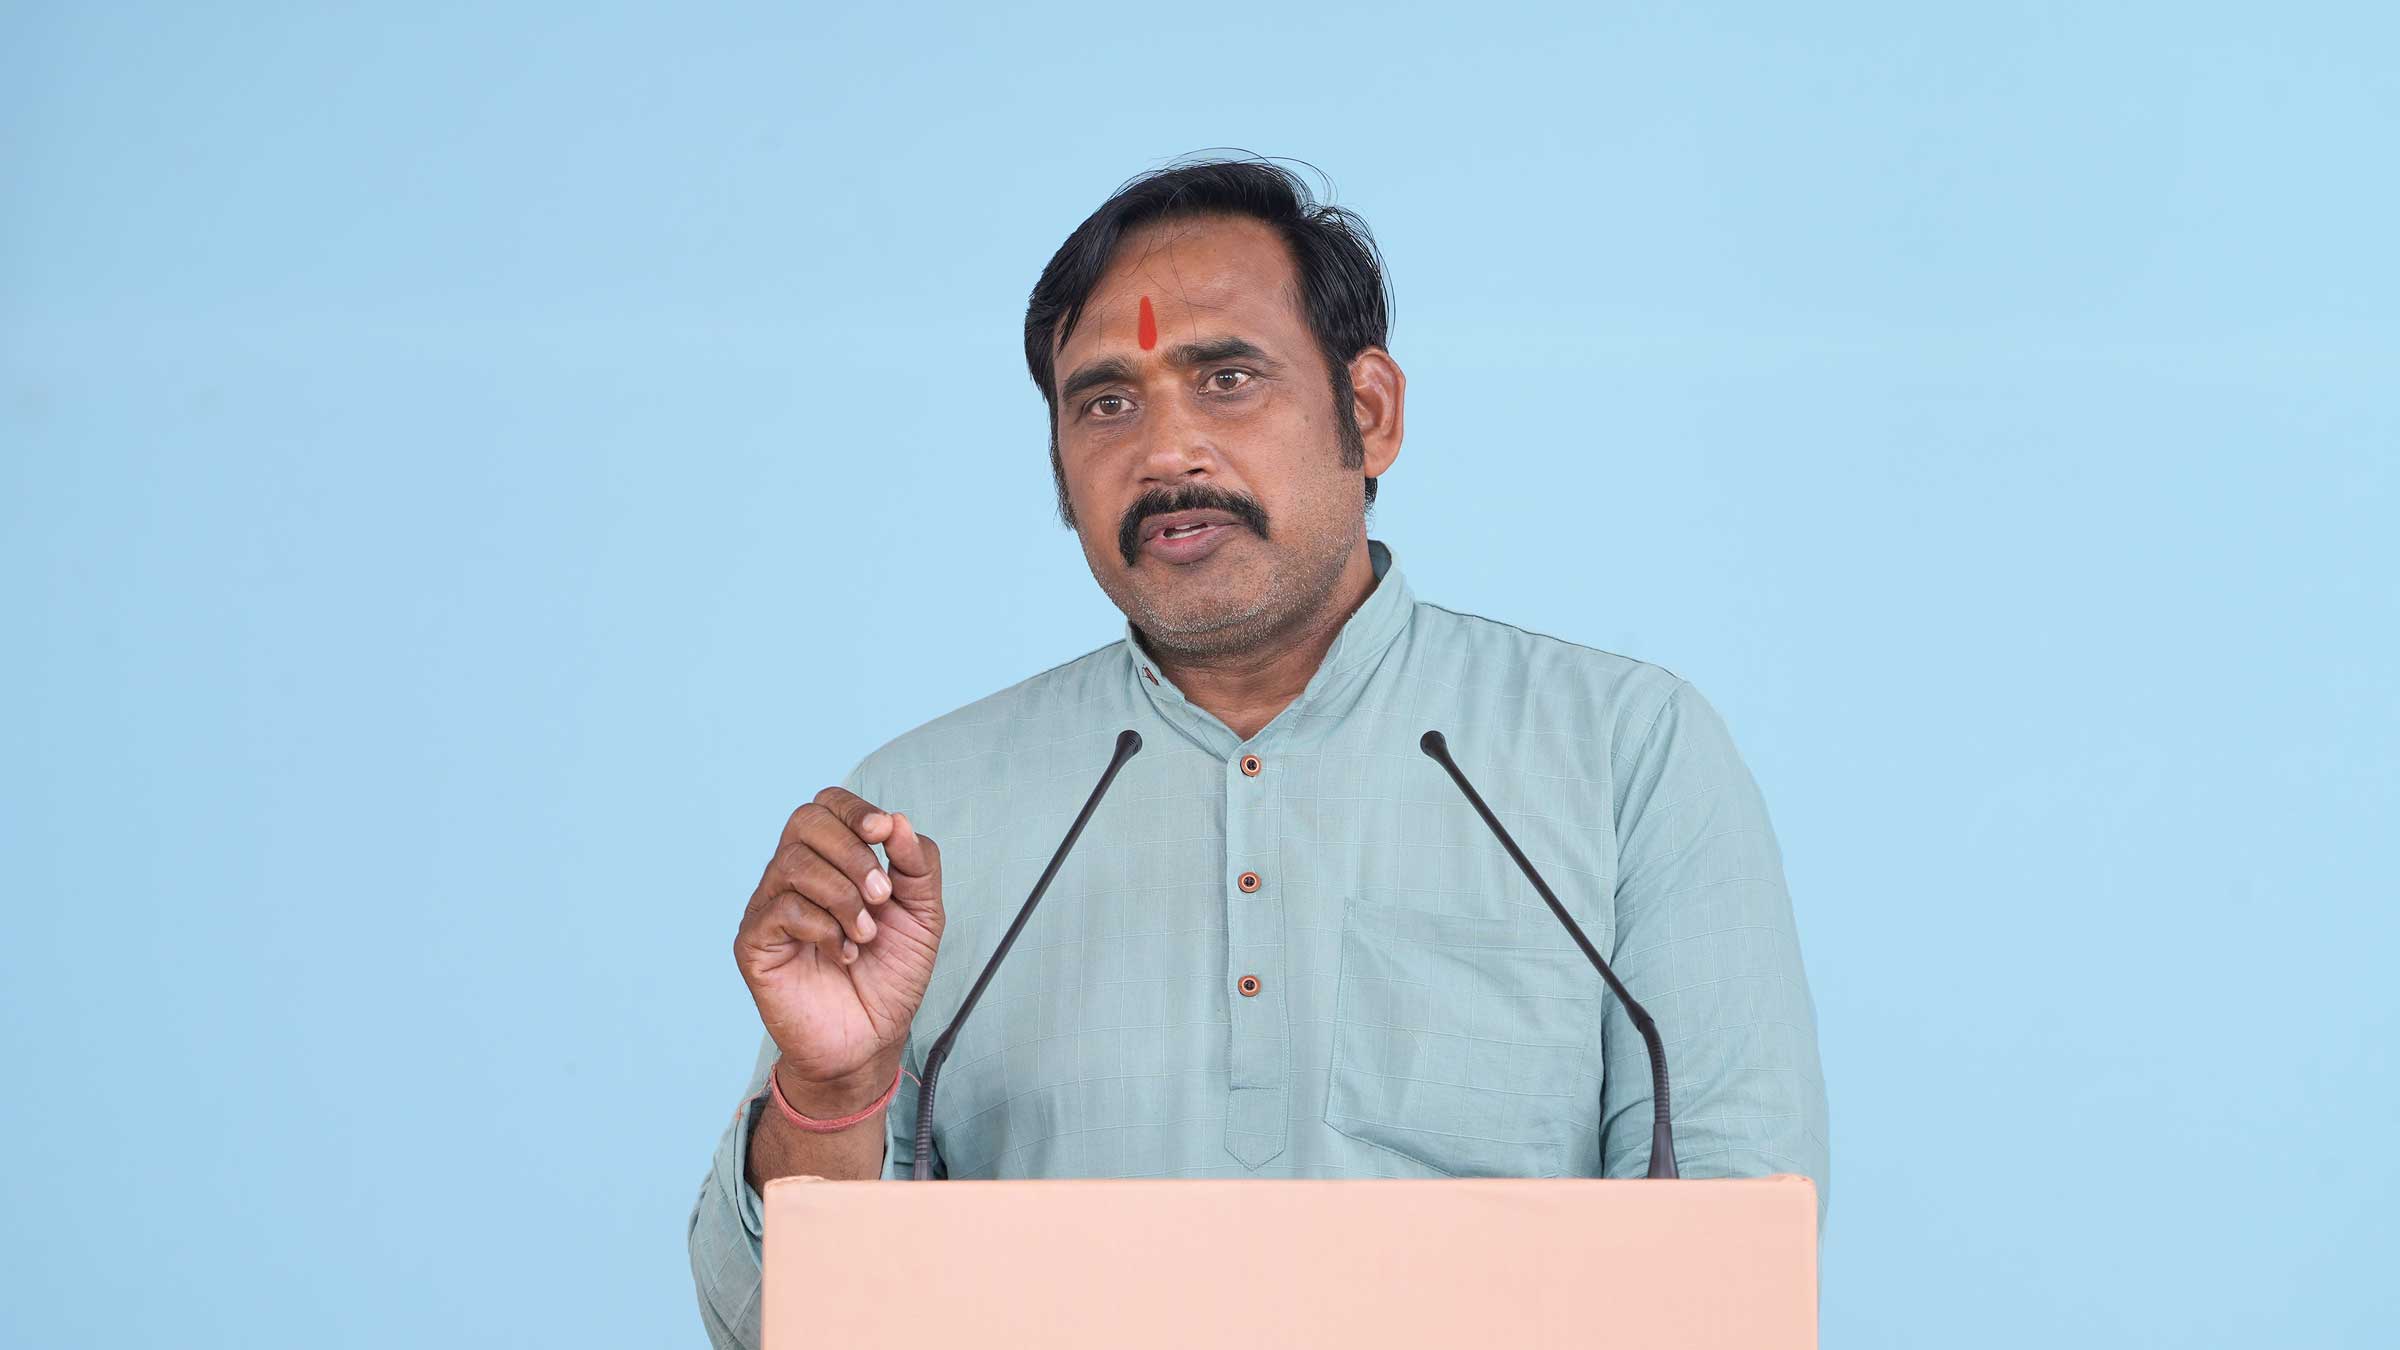 In the session on ‘Malpractices in the Indian Education System', Mr Jagdish Choudhary (Director, Balaji Group of Institutions, Ballabhgarh, Haryana) said – The Indian Education System should be such that many people become like Swami Vivekananda.